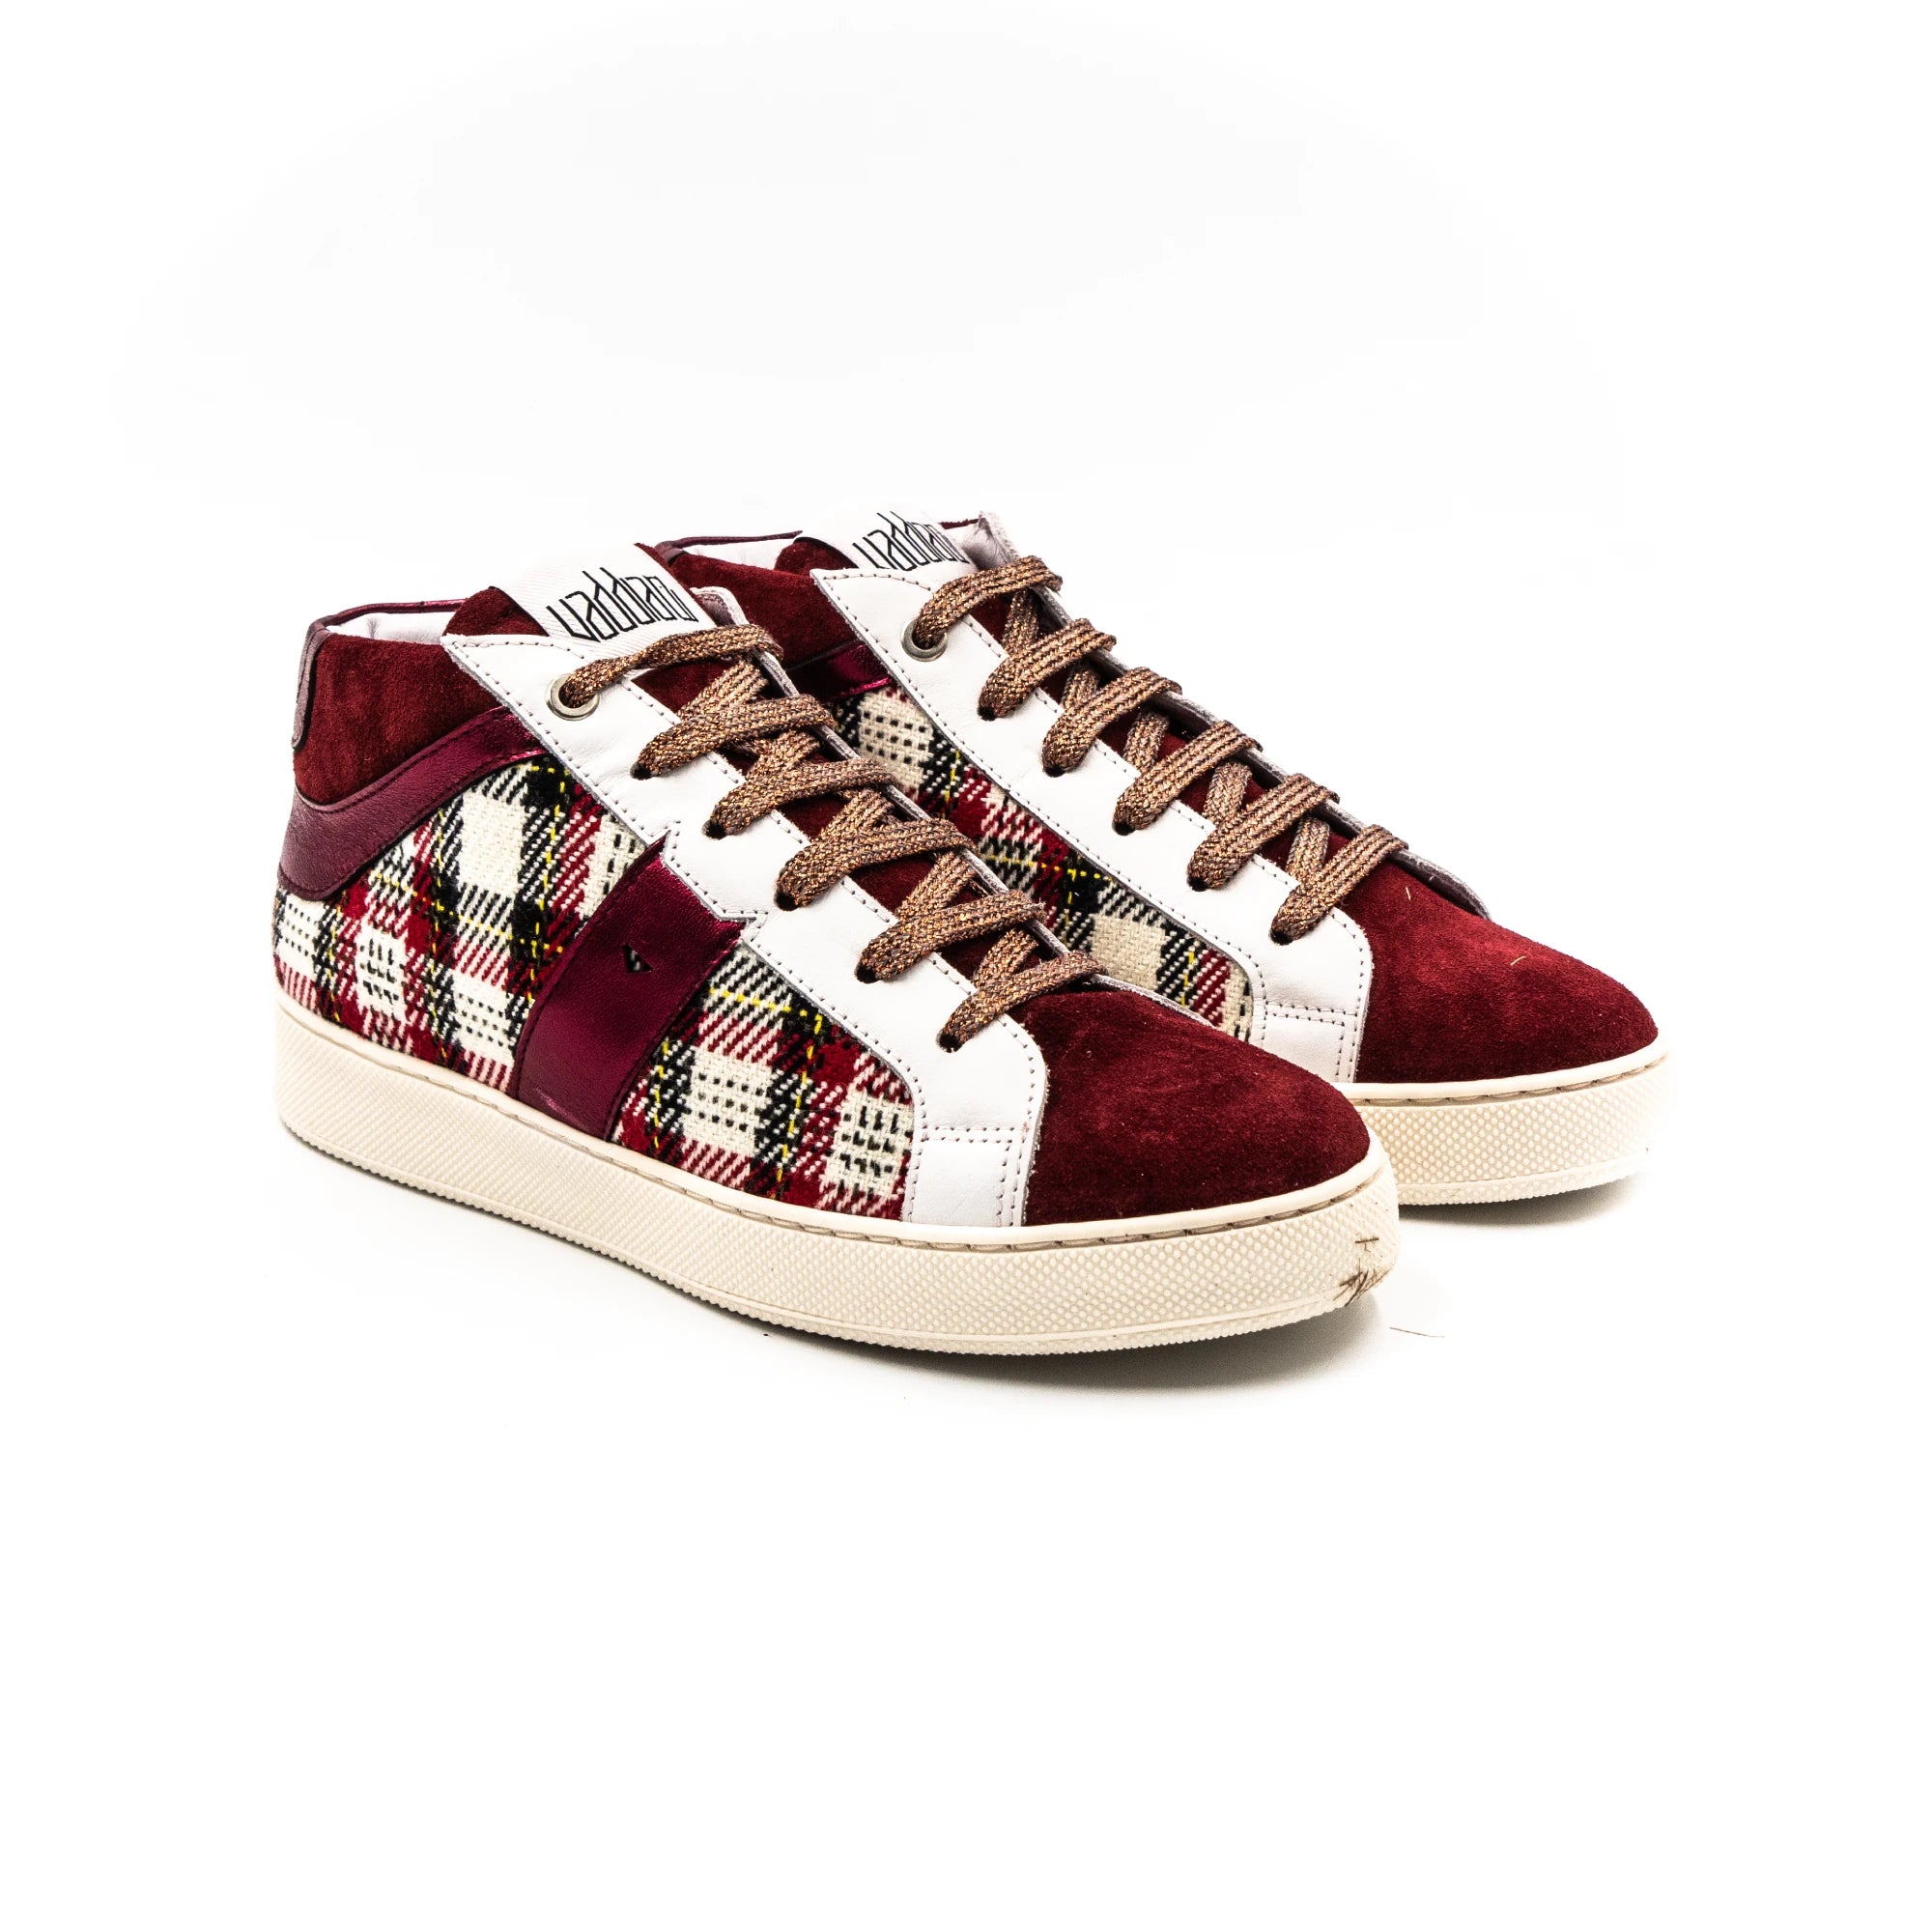 High-top sneakers with a checkered pattern in red, ecru and yellow.